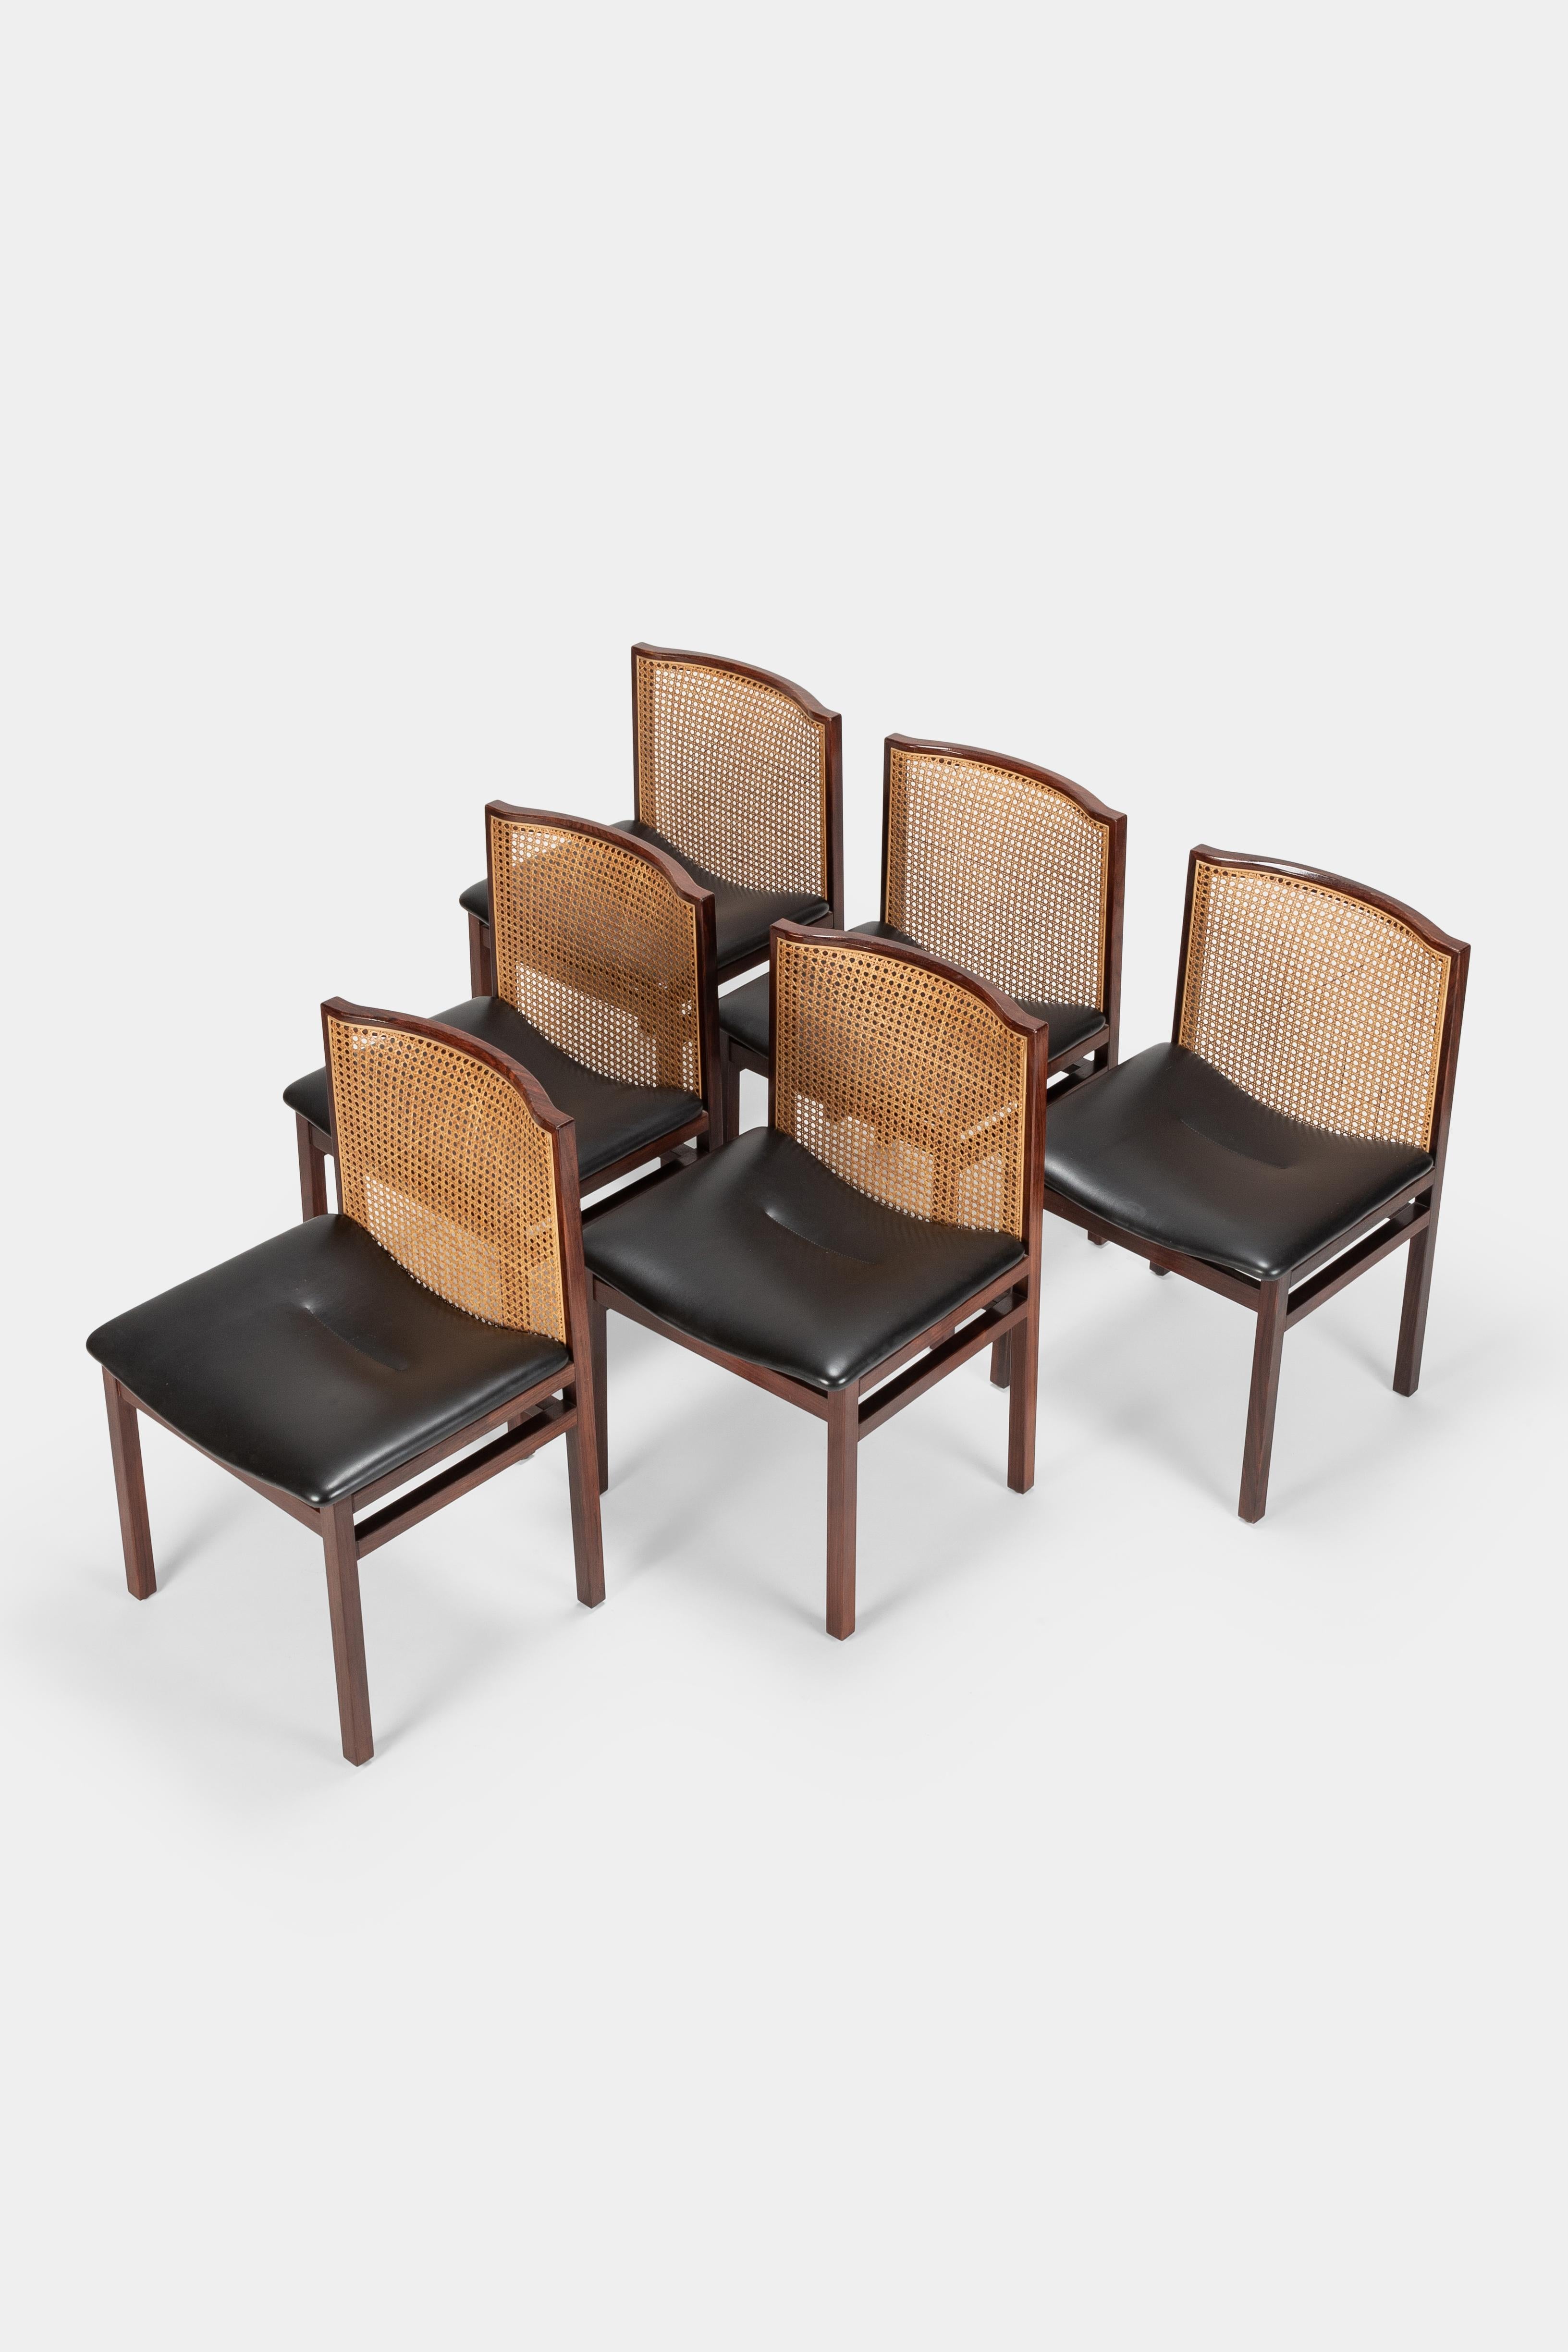 6 Tito Agnoli dining room chairs manufactured by La Linea in the 1960s in Italy. Comfortable seats covered with fine black vinyl leather. Cane back rest attached to a solid rosewood frame.